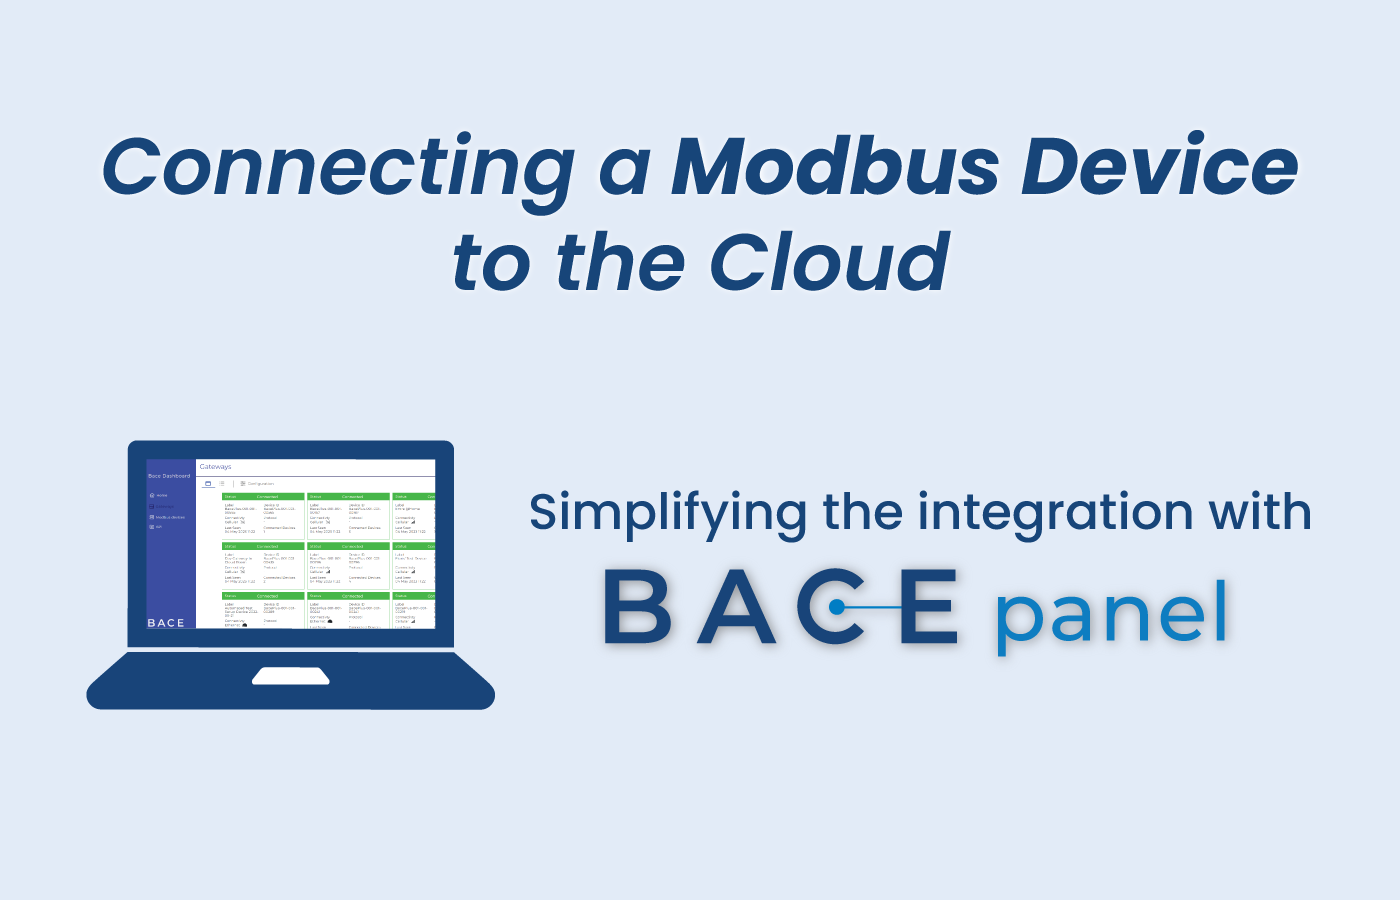 Connecting Modbus Devices to the Cloud